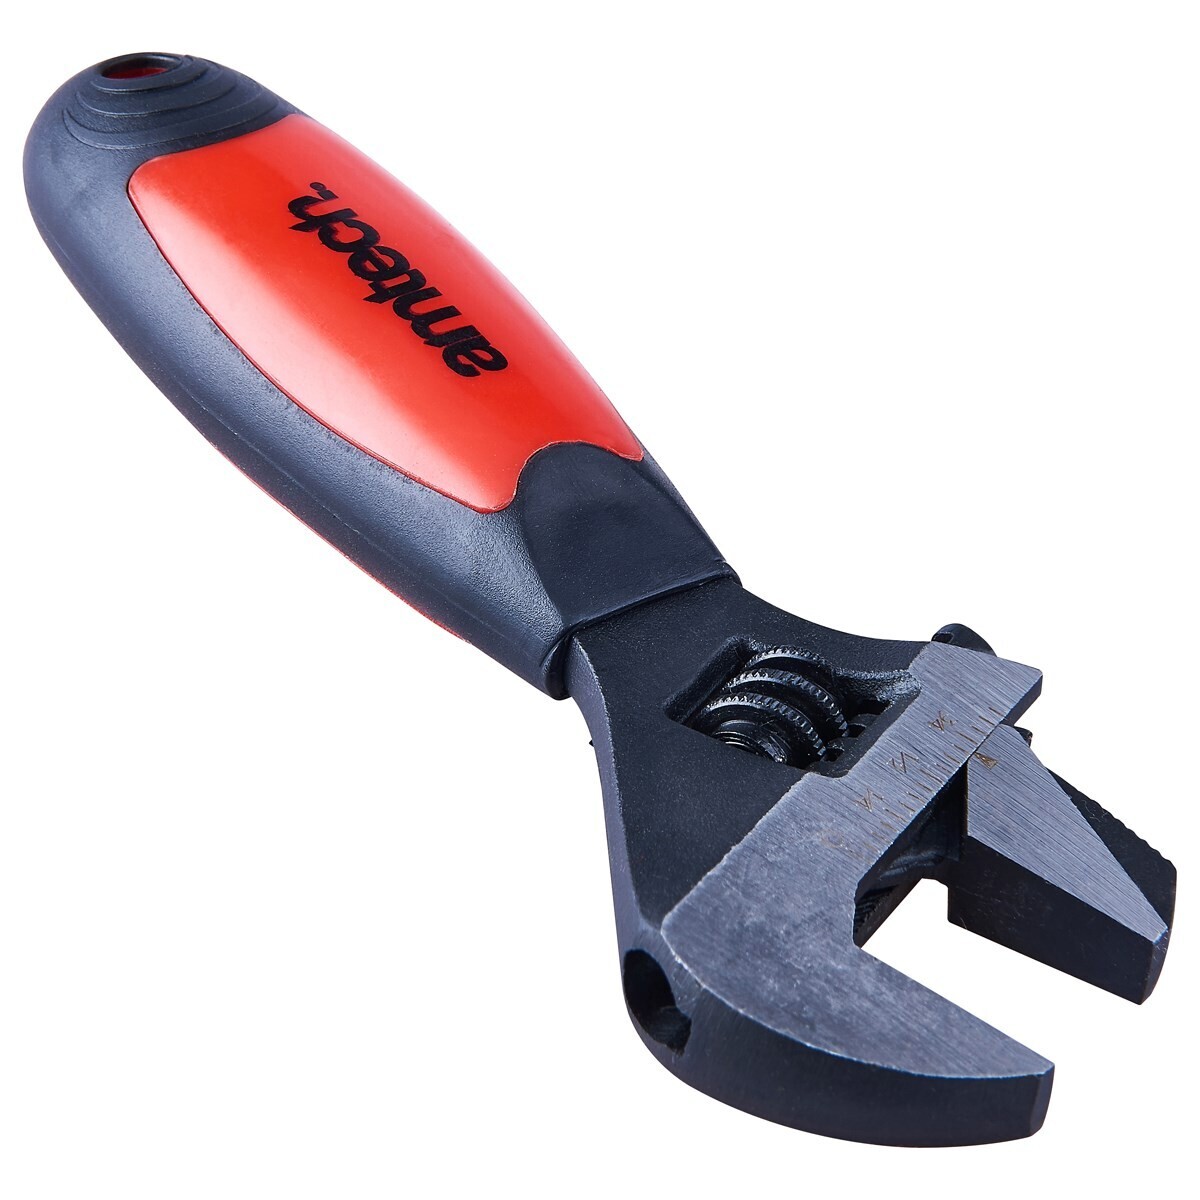 2-in-1 stubby pipe/adjustable wrench